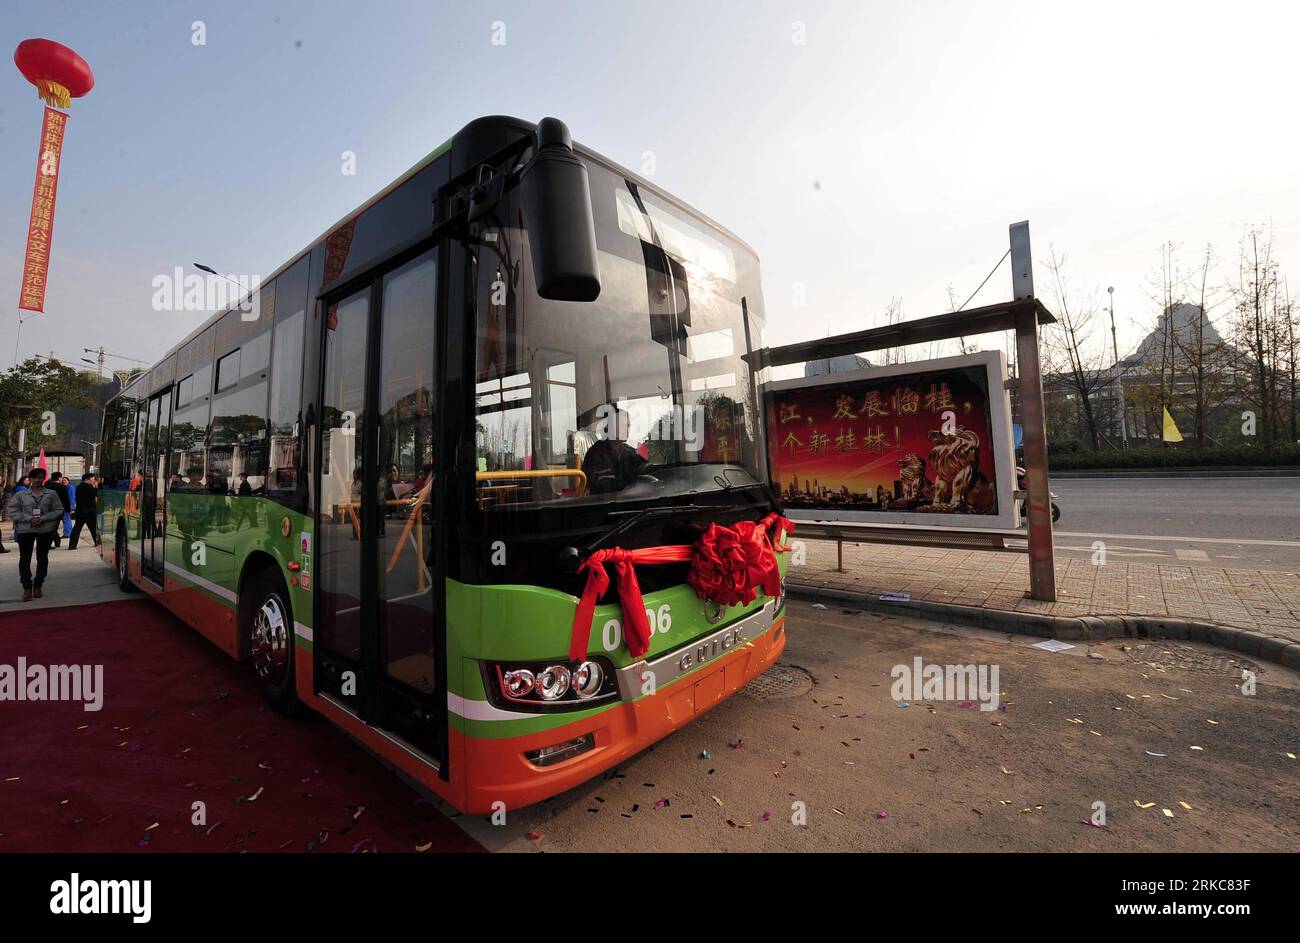 Bildnummer: 54694421  Datum: 01.12.2010  Copyright: imago/Xinhua (101201) -- GUILIN, Dec. 1, 2010 (Xinhua) -- An electronic bus runs on the road in Guilin, south China s Guangxi Zhuang Autonomous Region, Nov. 1, 2010. Guilin s first battery charging station for electronic vehicles, as well as the first batch of electronic public buses was put into use on Wednesday, in a bid to develop Guilin an environmental friendly city. (Xinhua/Chen Ruihua) (cxy) CHINA-GUANGXI-GUILIN-ELECTRONIC BUS (CN) PUBLICATIONxNOTxINxCHN Gesellschaft kbdig xcb 2010 quer o0 Elektroauto Elektroantrieb Auto Aufladen Strom Stock Photo